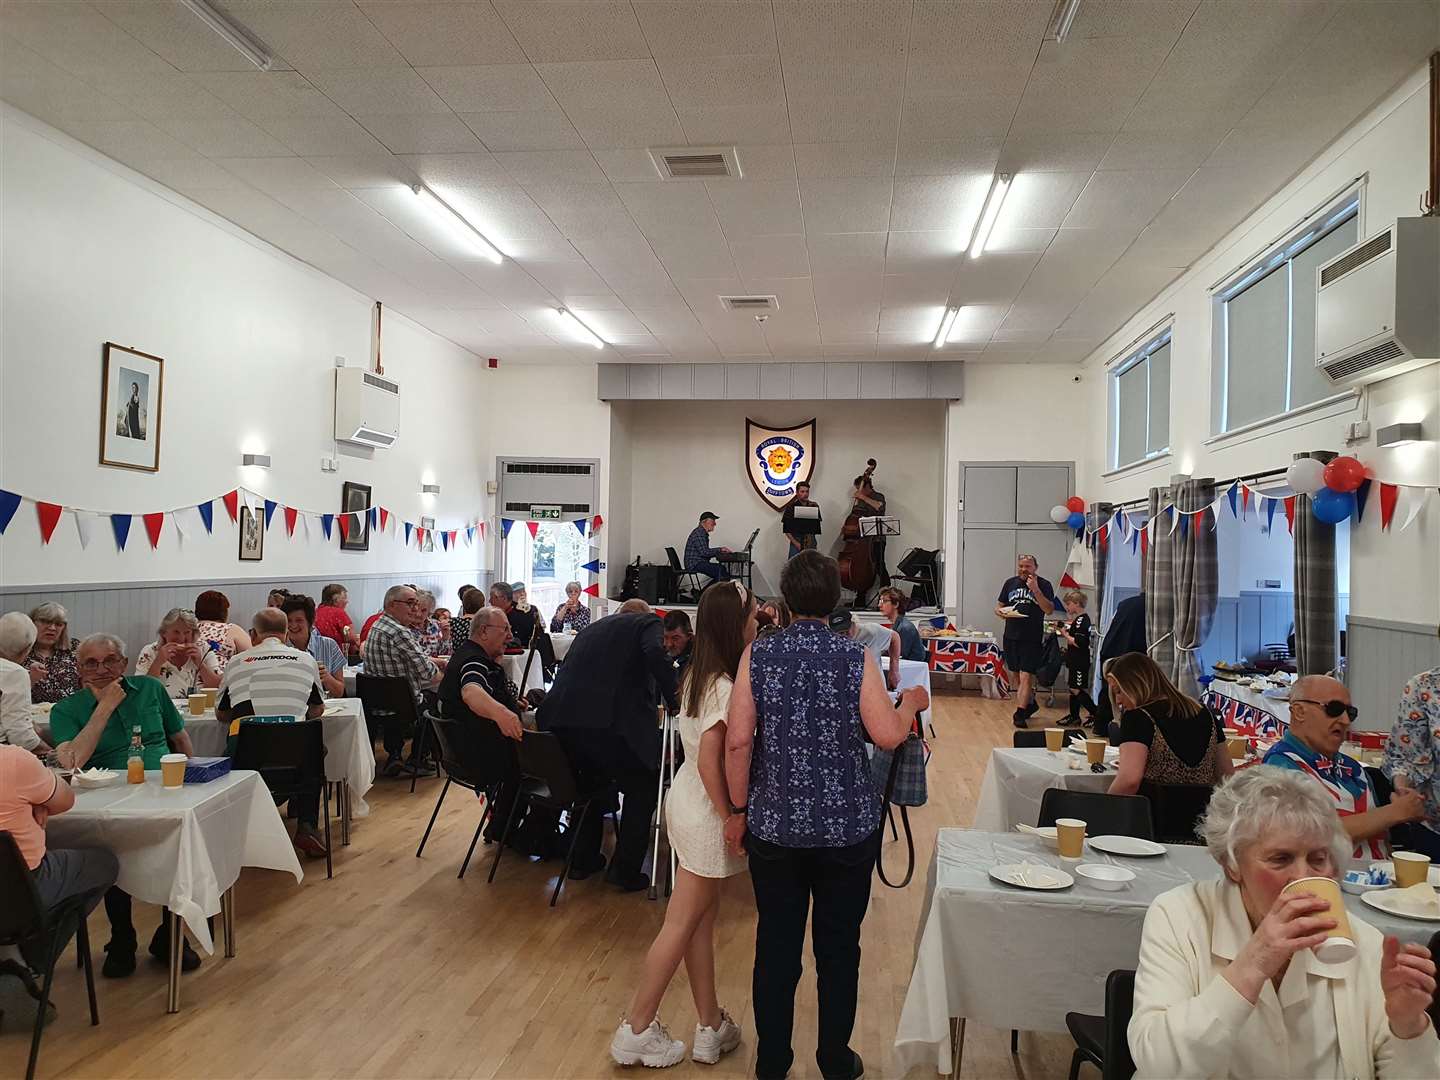 The main hall was packed with people enjoying refreshments and a live jazz band.